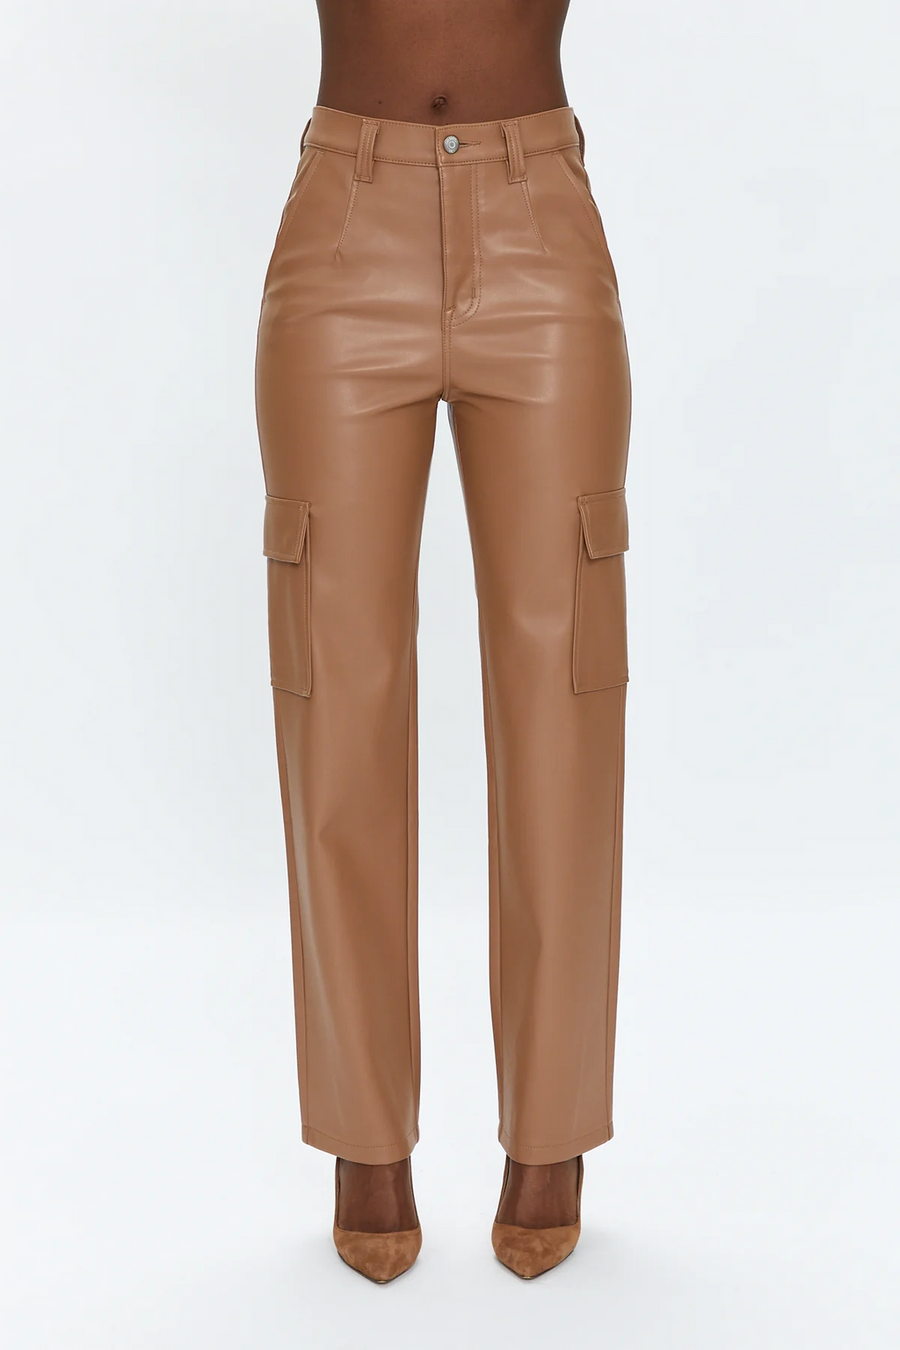 Cassie Utility Pant by Pistola